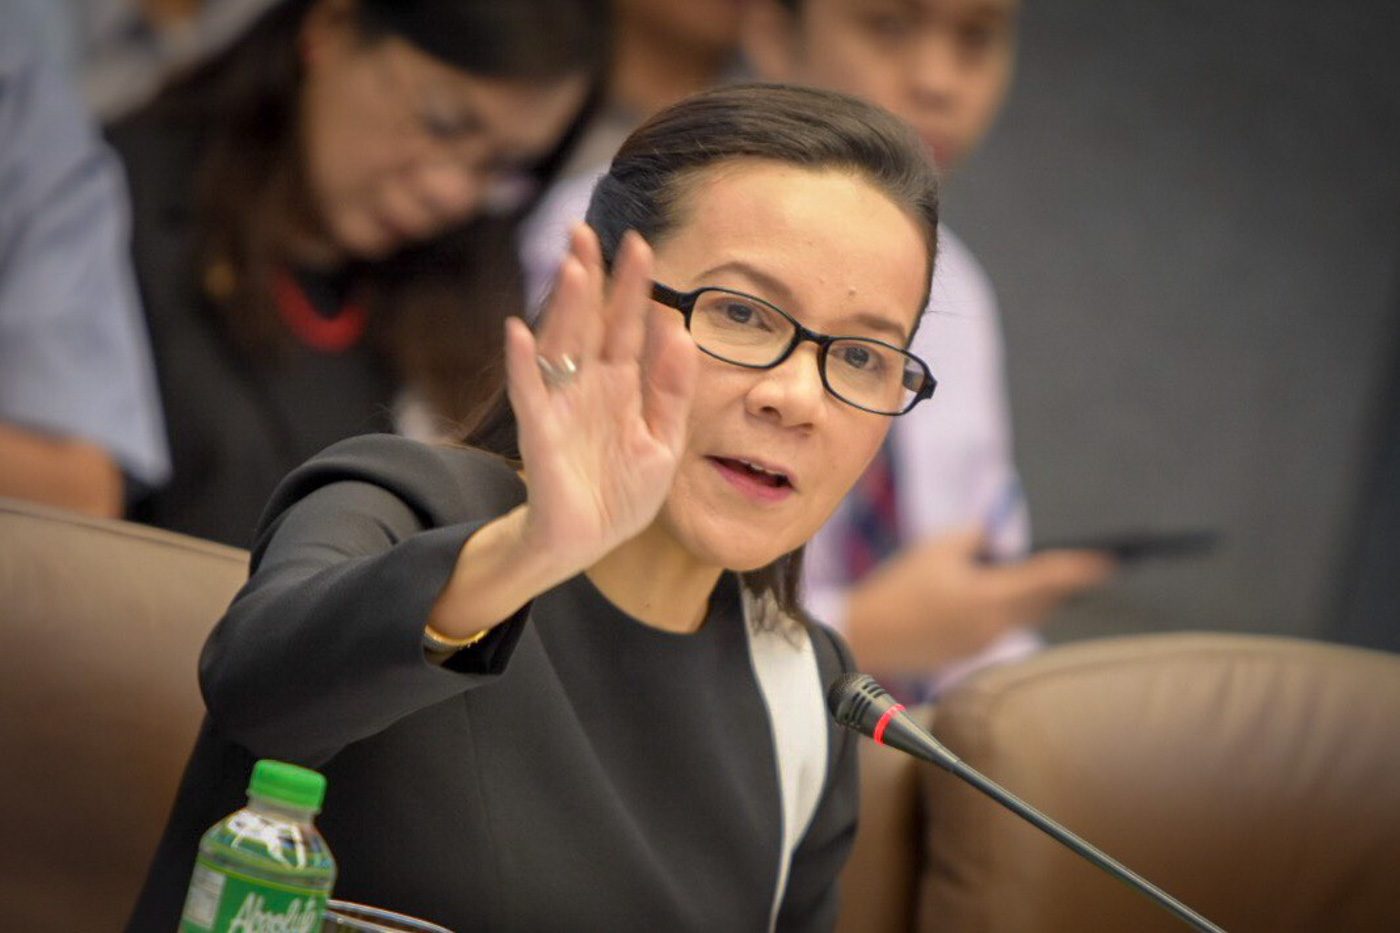 Poe to Palace: What makes you think China will leave West PH Sea islands?